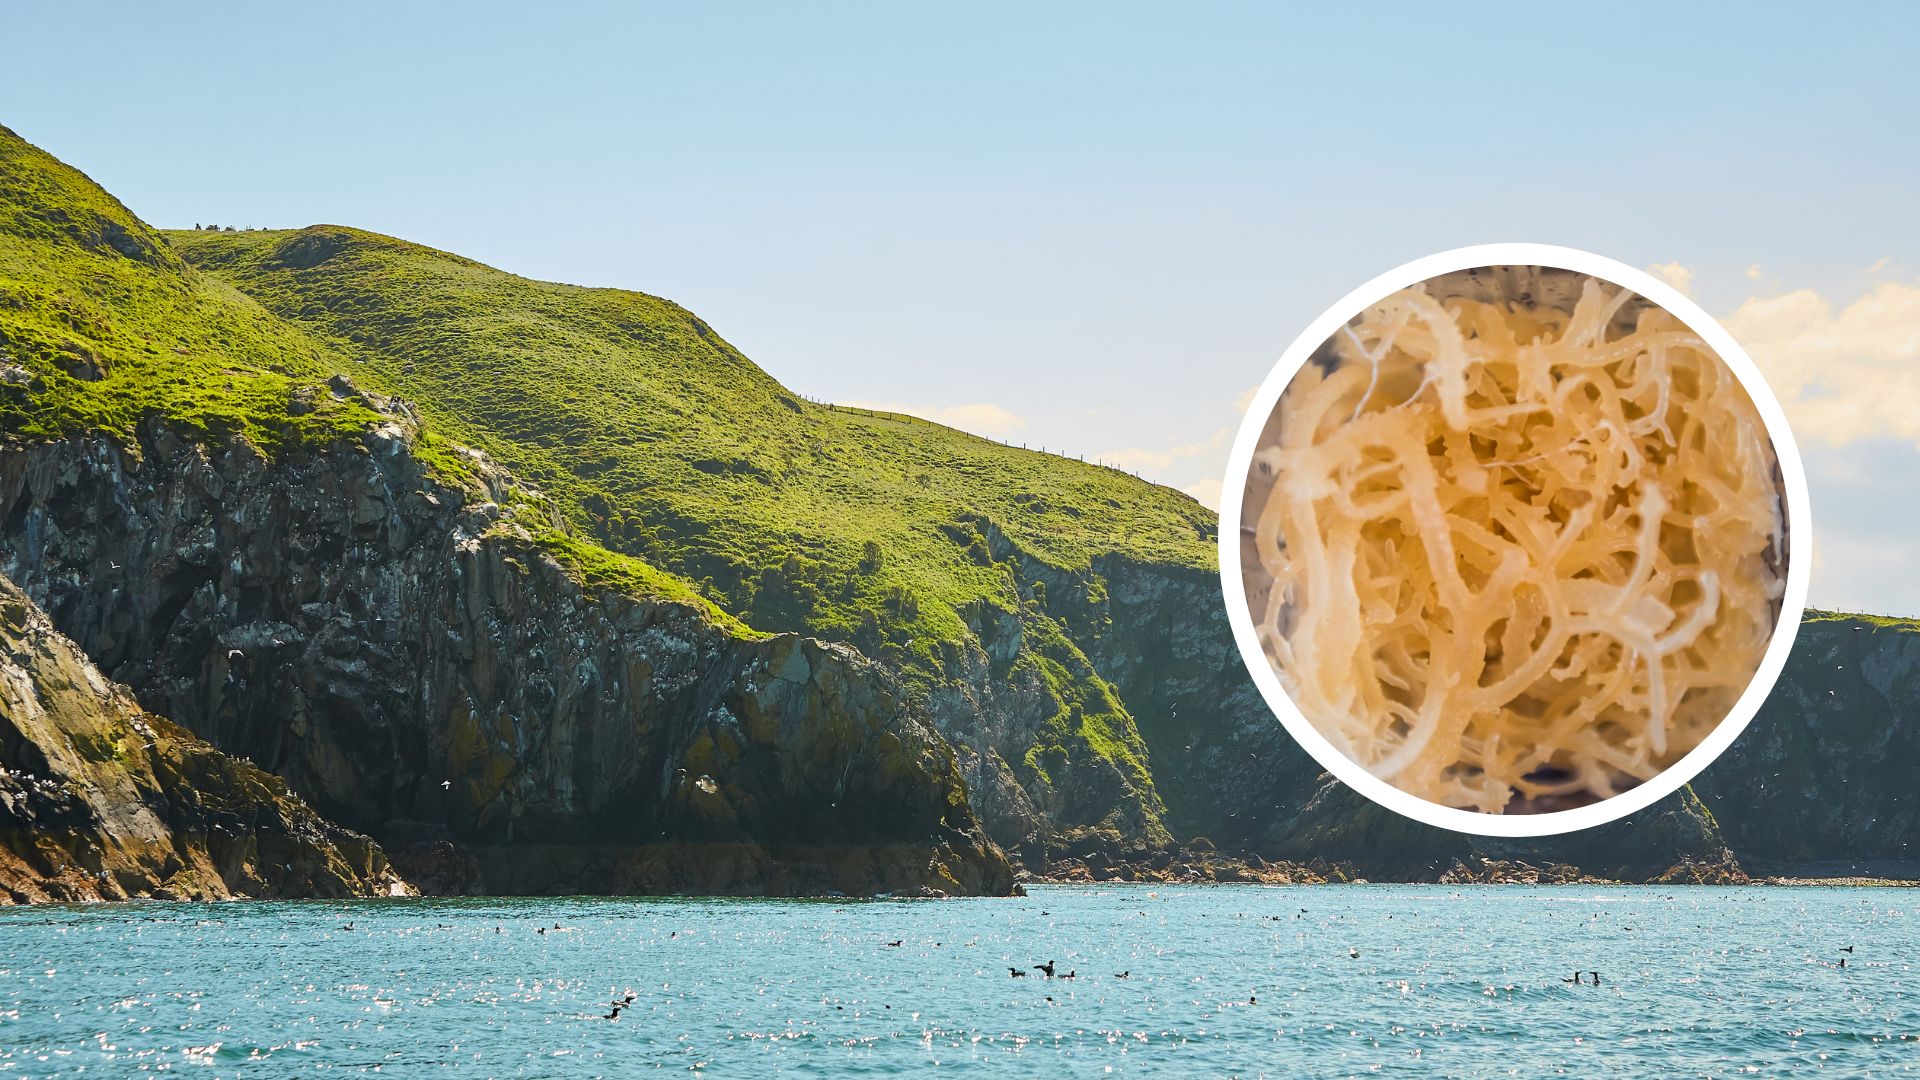 Irish Sea Moss: What Is It and How Does it Help Your Skin?